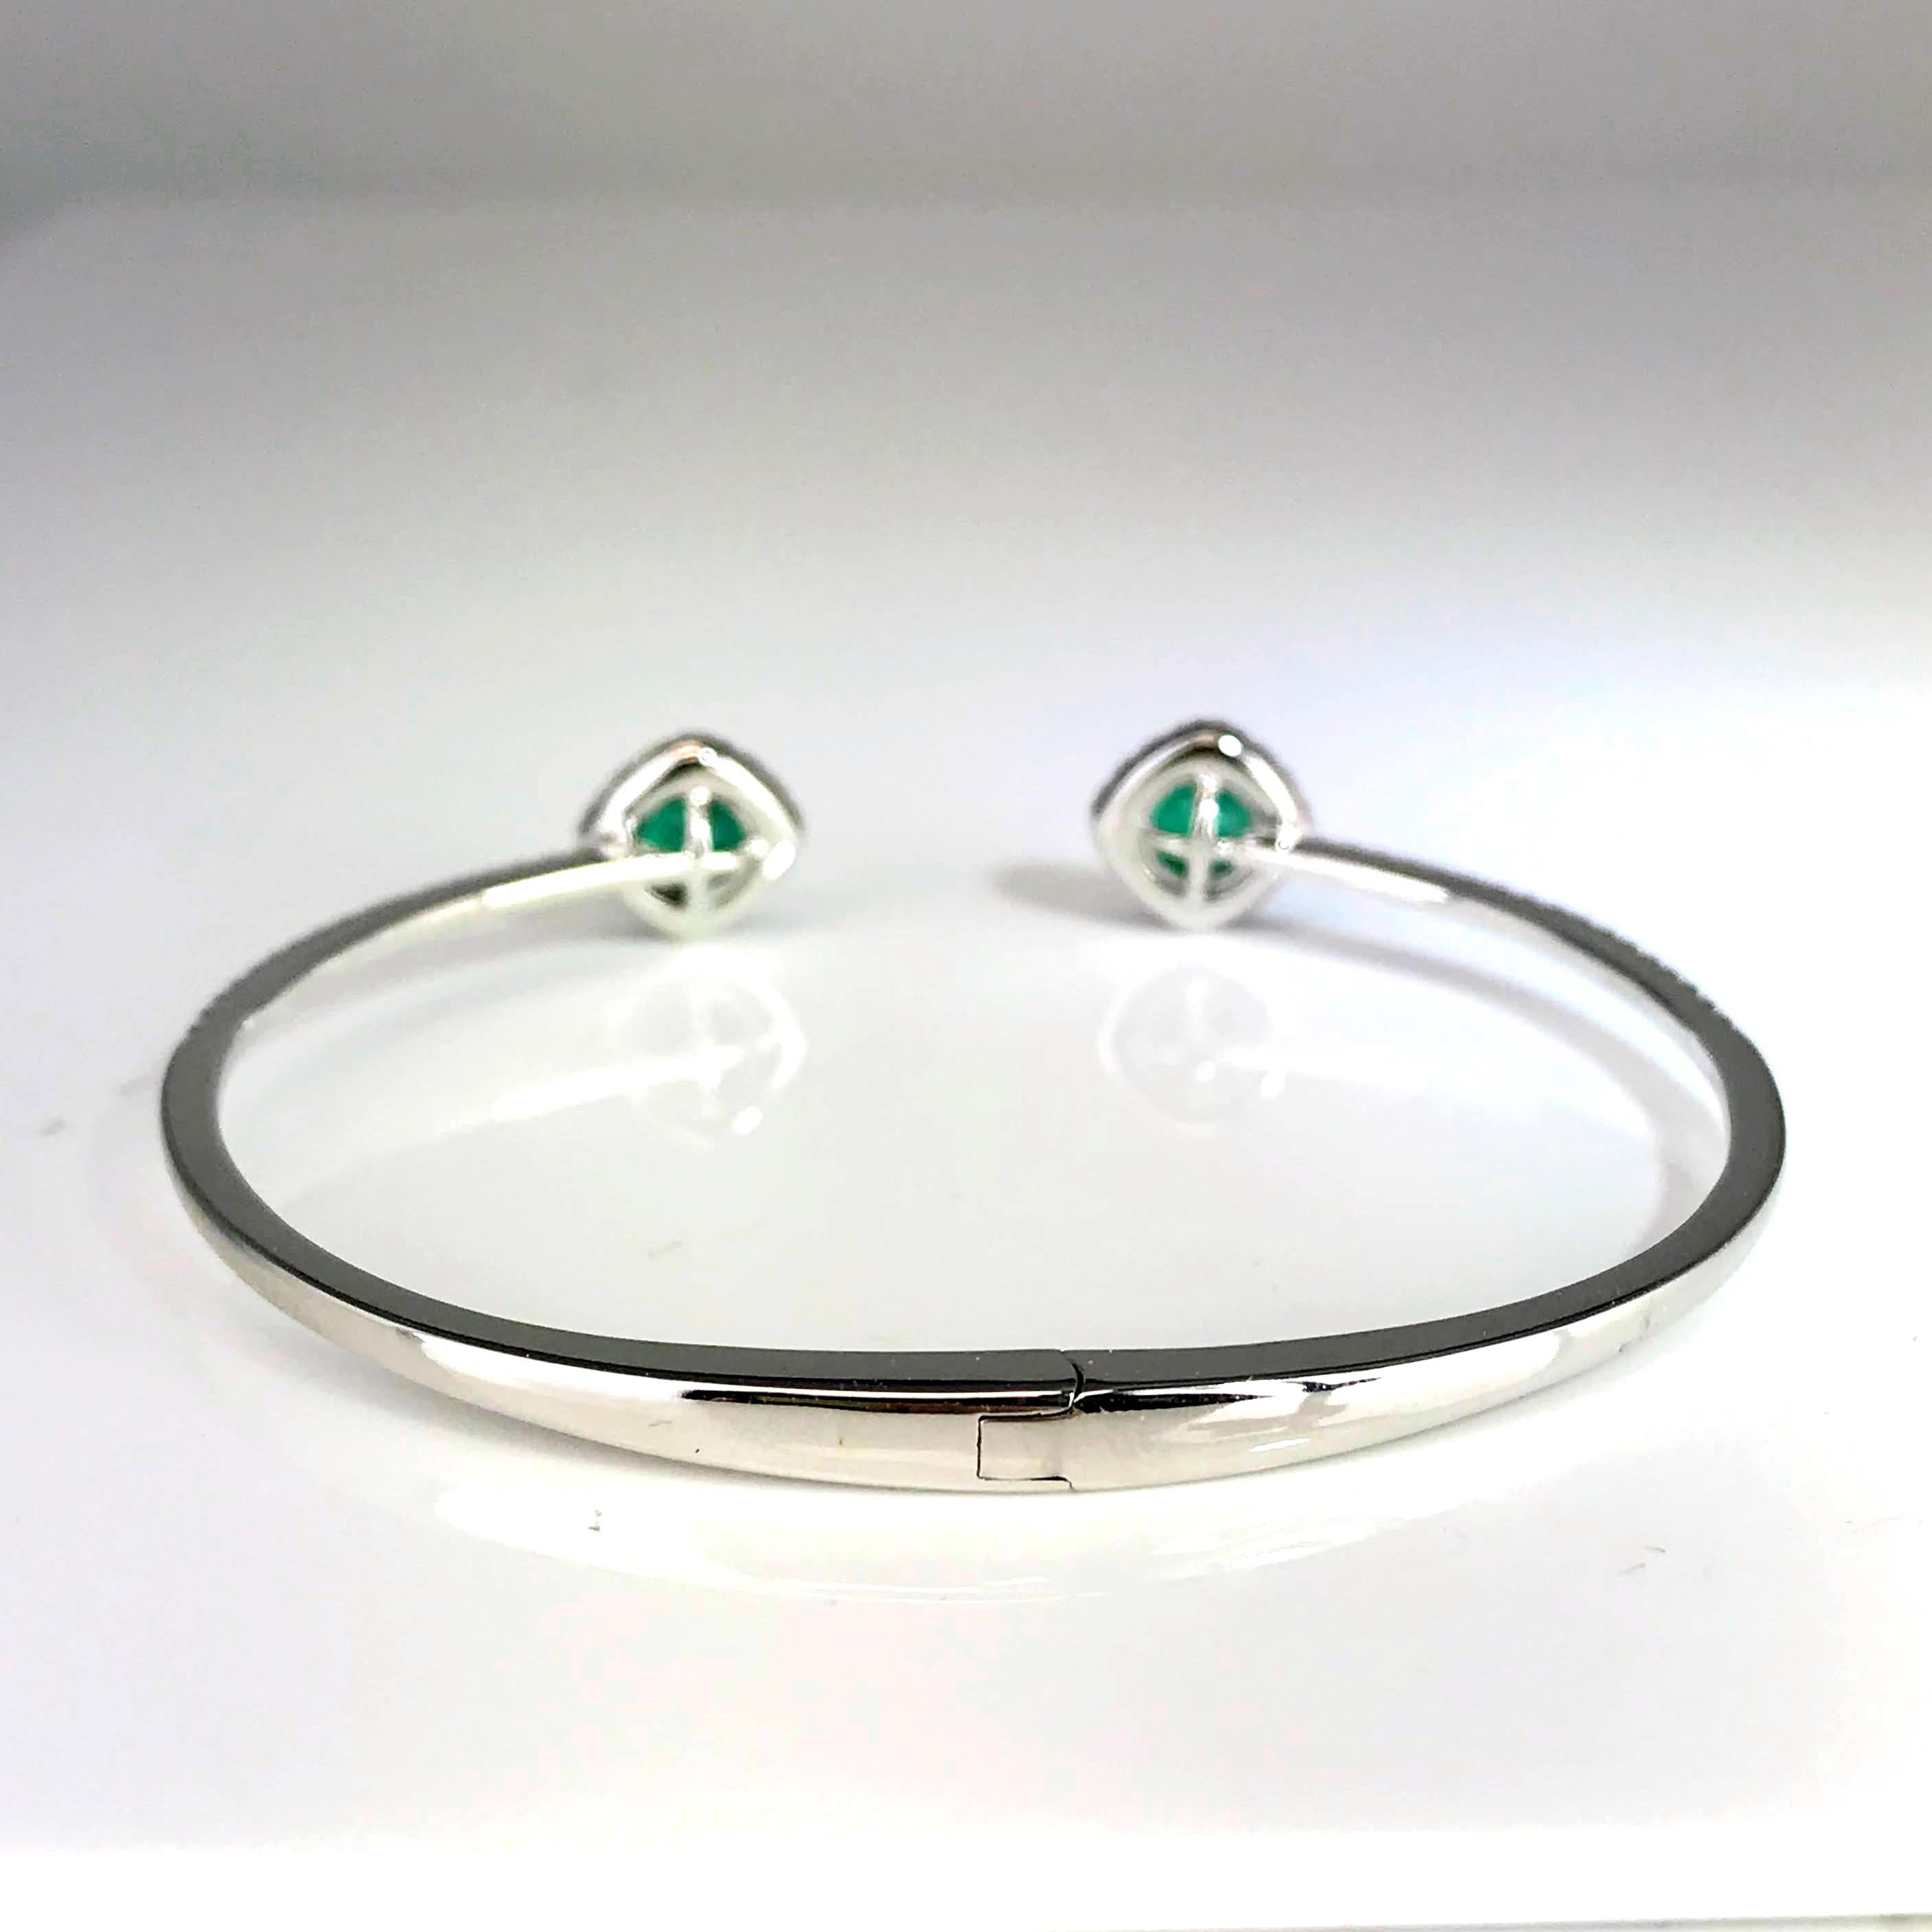 1.02 Carat Round Emerald and Natural Diamond Bangle in 14k White Gold ref189 For Sale 4